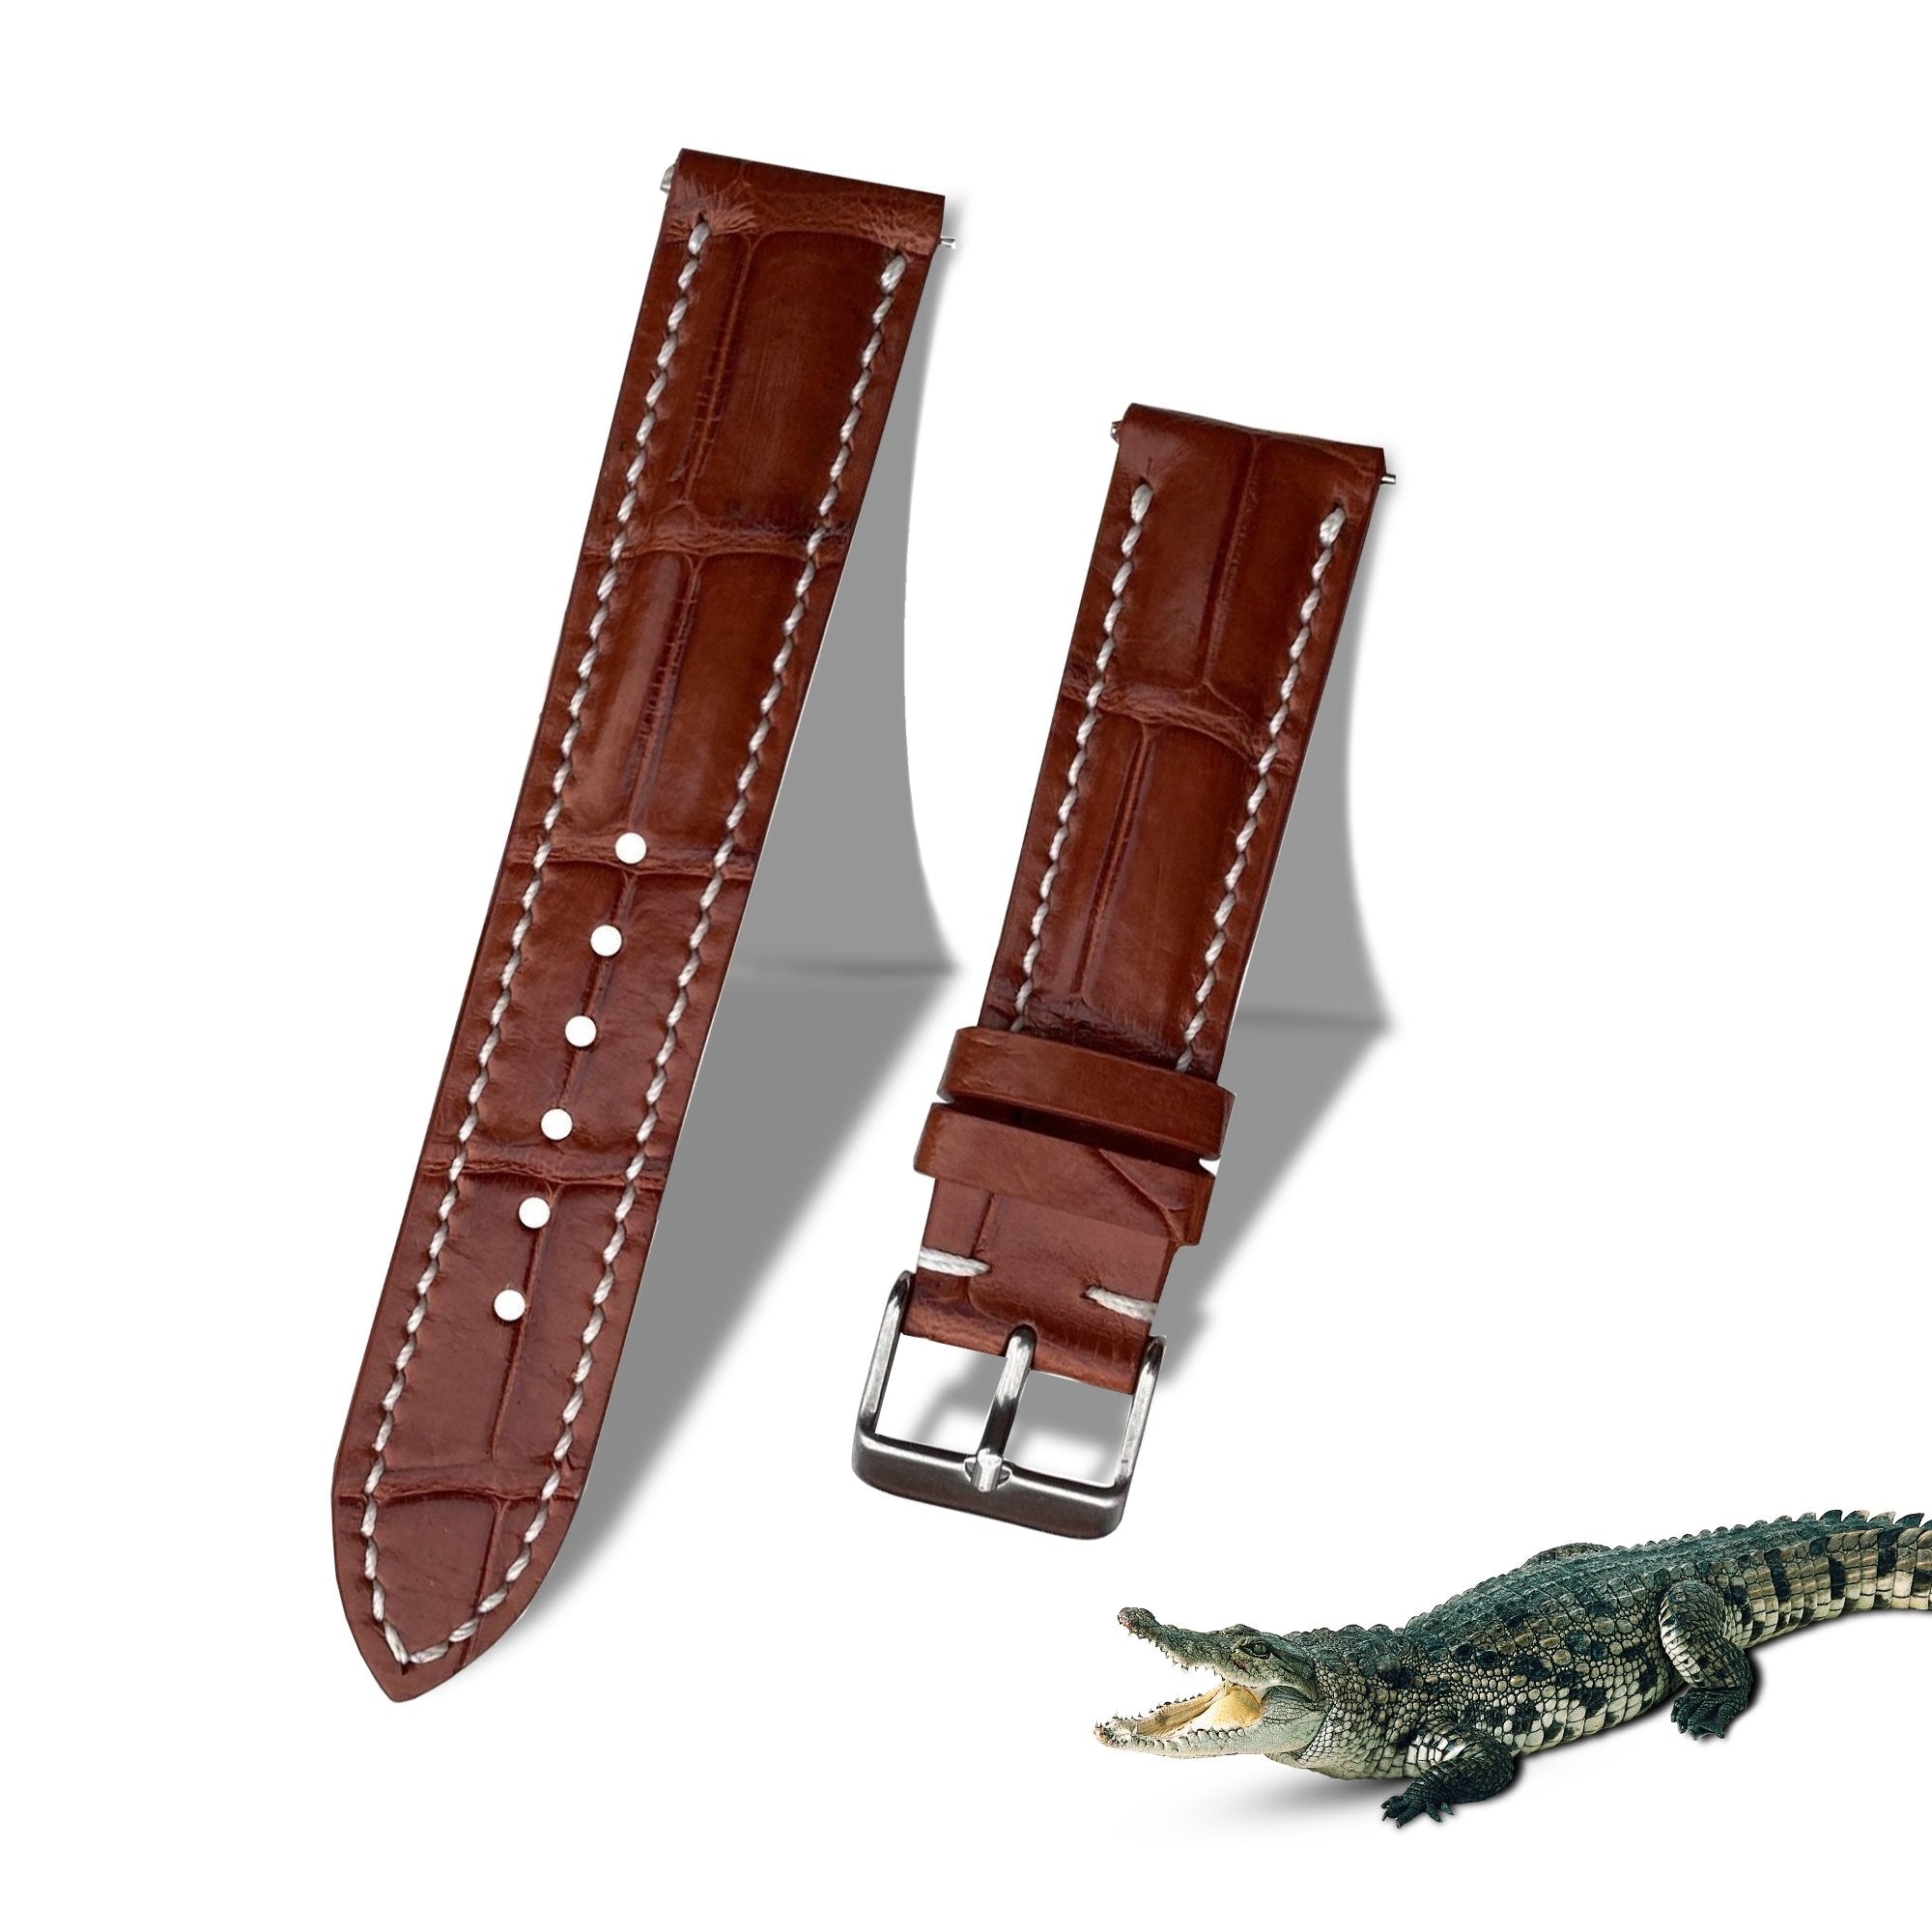 White Hand Stitching Light Brown Alligator Leather Watch Band For Men | Premium Crocodile Replacement Wristwatch Strap | DH-157 - Vinacreations